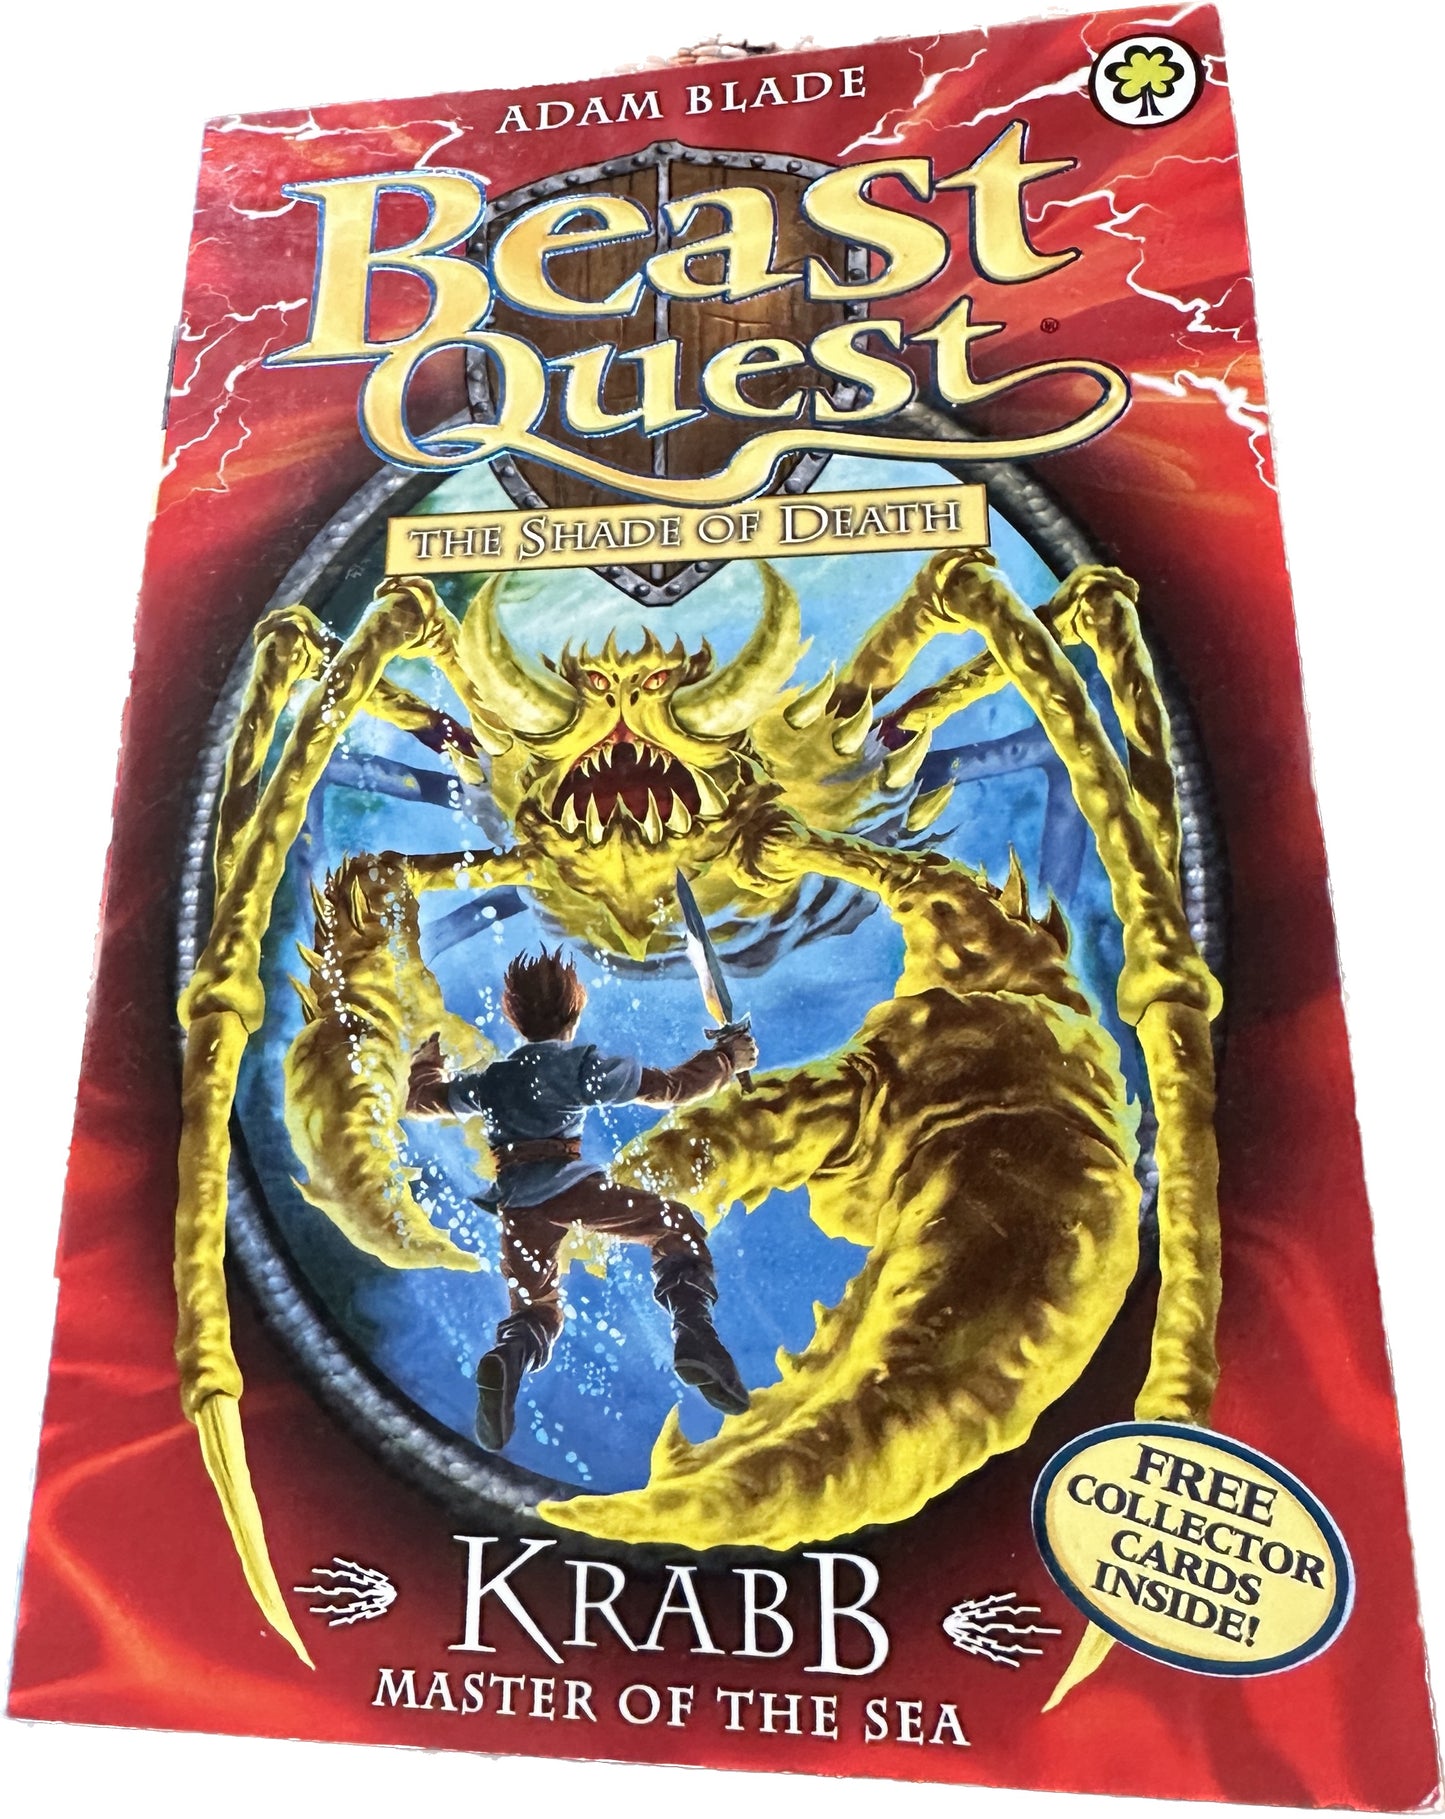 BEAST QUEST The shade of death : Krabb master of the sea